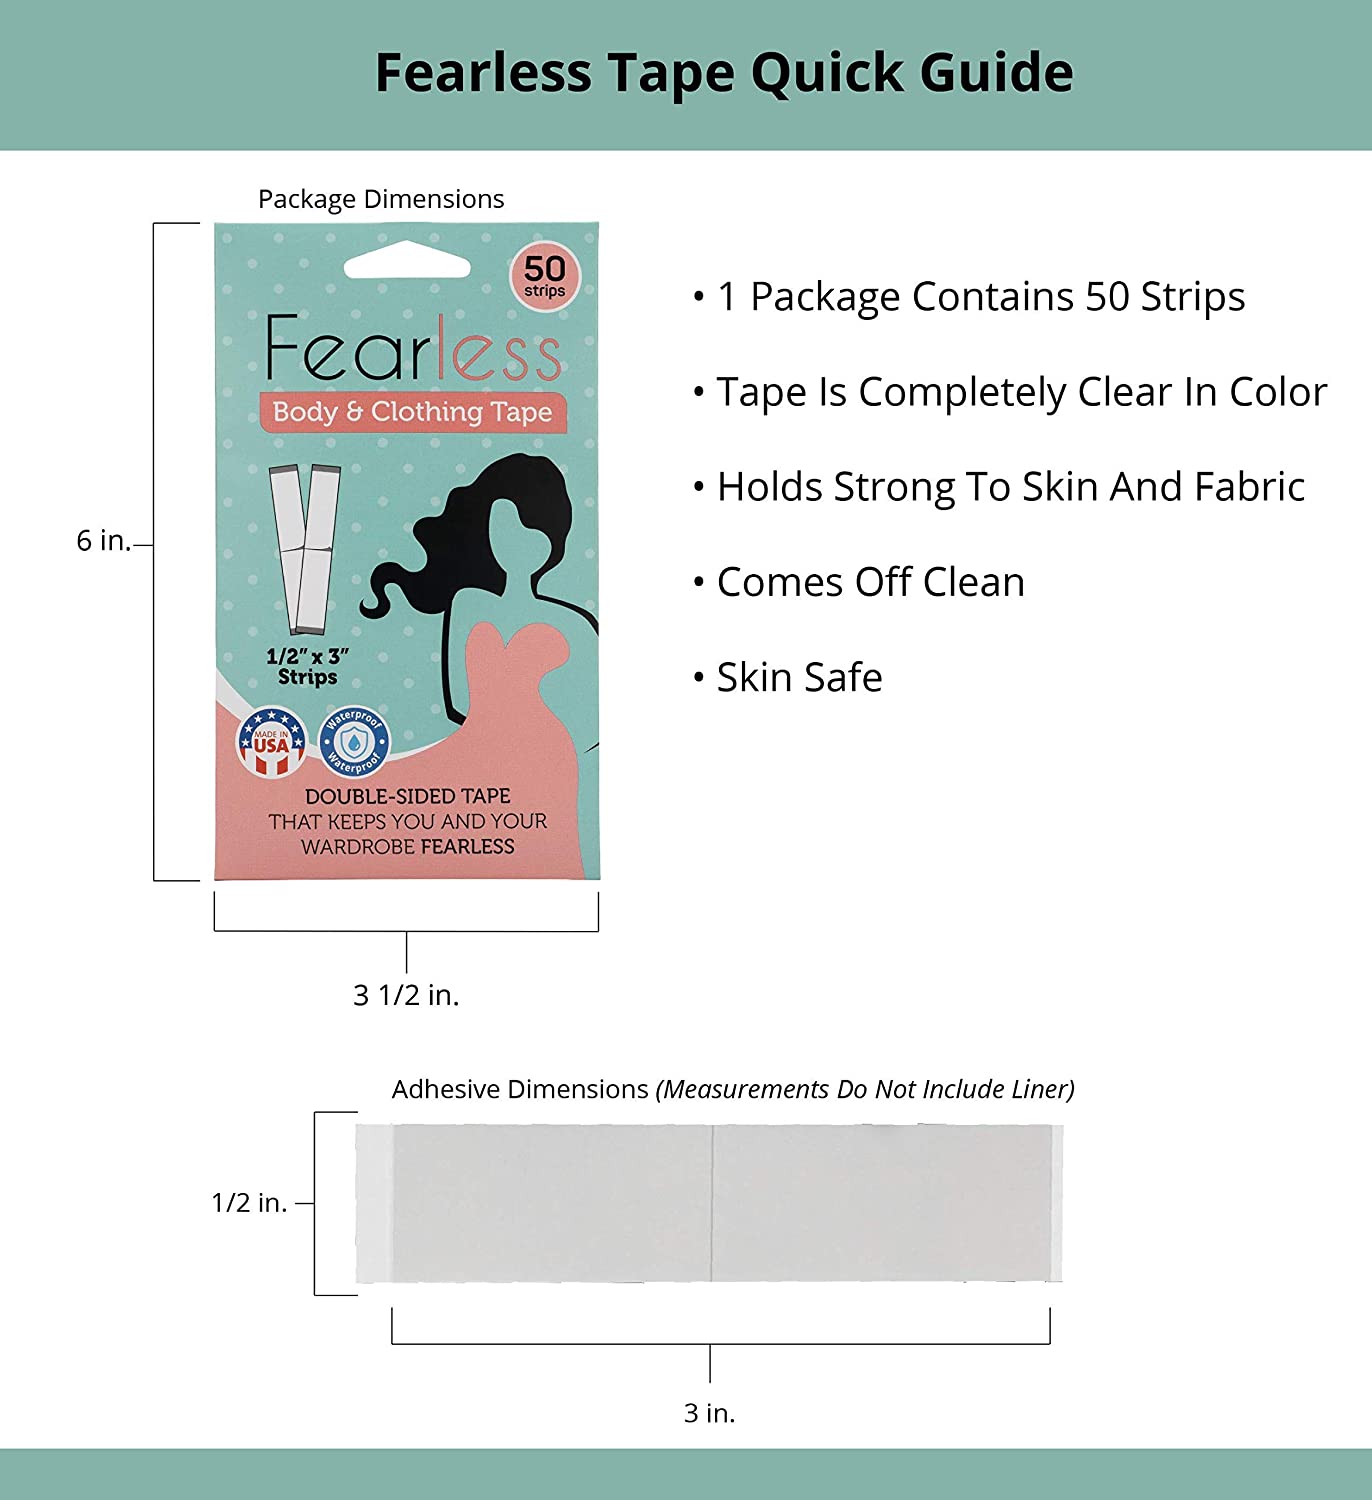 Fearless Tape Double Sided Tape for Fashion and Body -50 Count